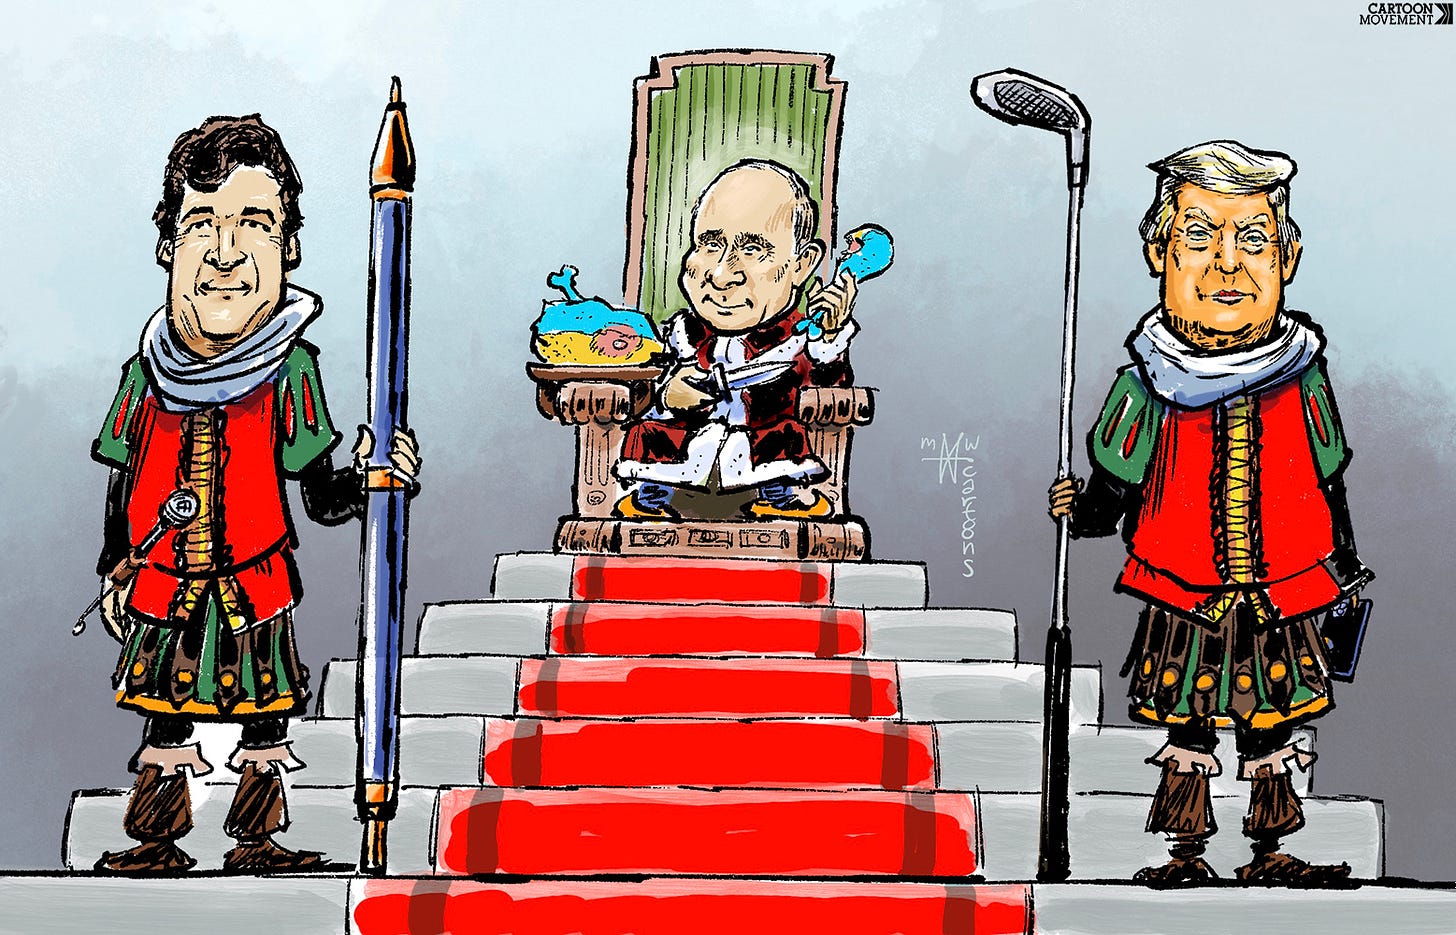 Cartoon showing Putin on a raised throne eating a turkey with the flag of Ukraine on it. Guarding him are Trump and Tucker Carlson, dressed as ceremonial guards. Carlson is holding a large pen as a spear, and trump is holding a golf club.